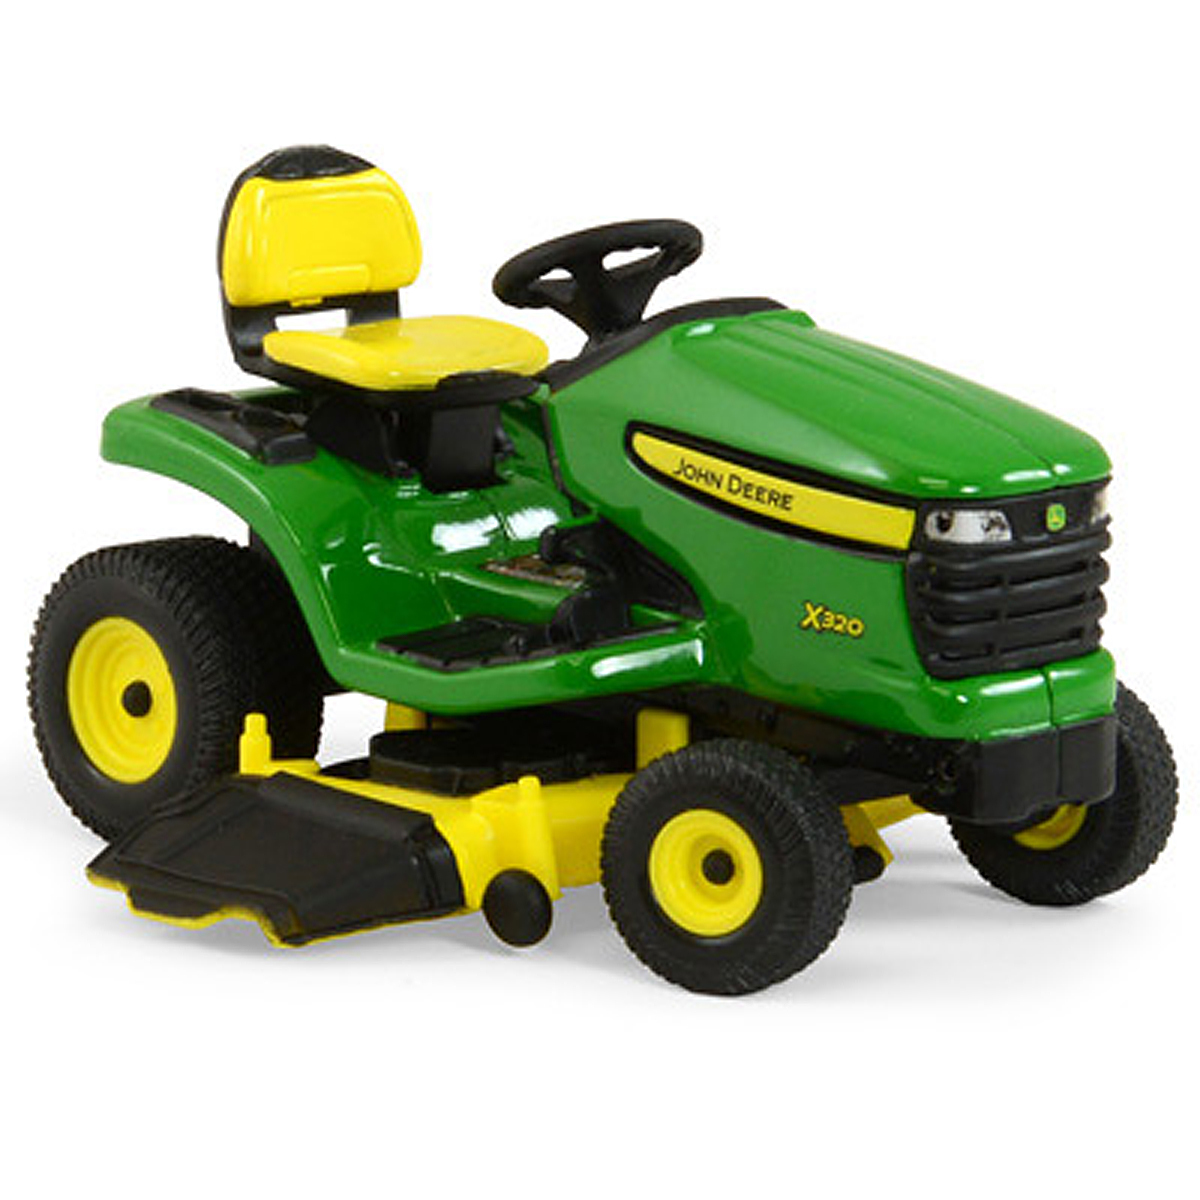 toy lawn mowers for toddlers